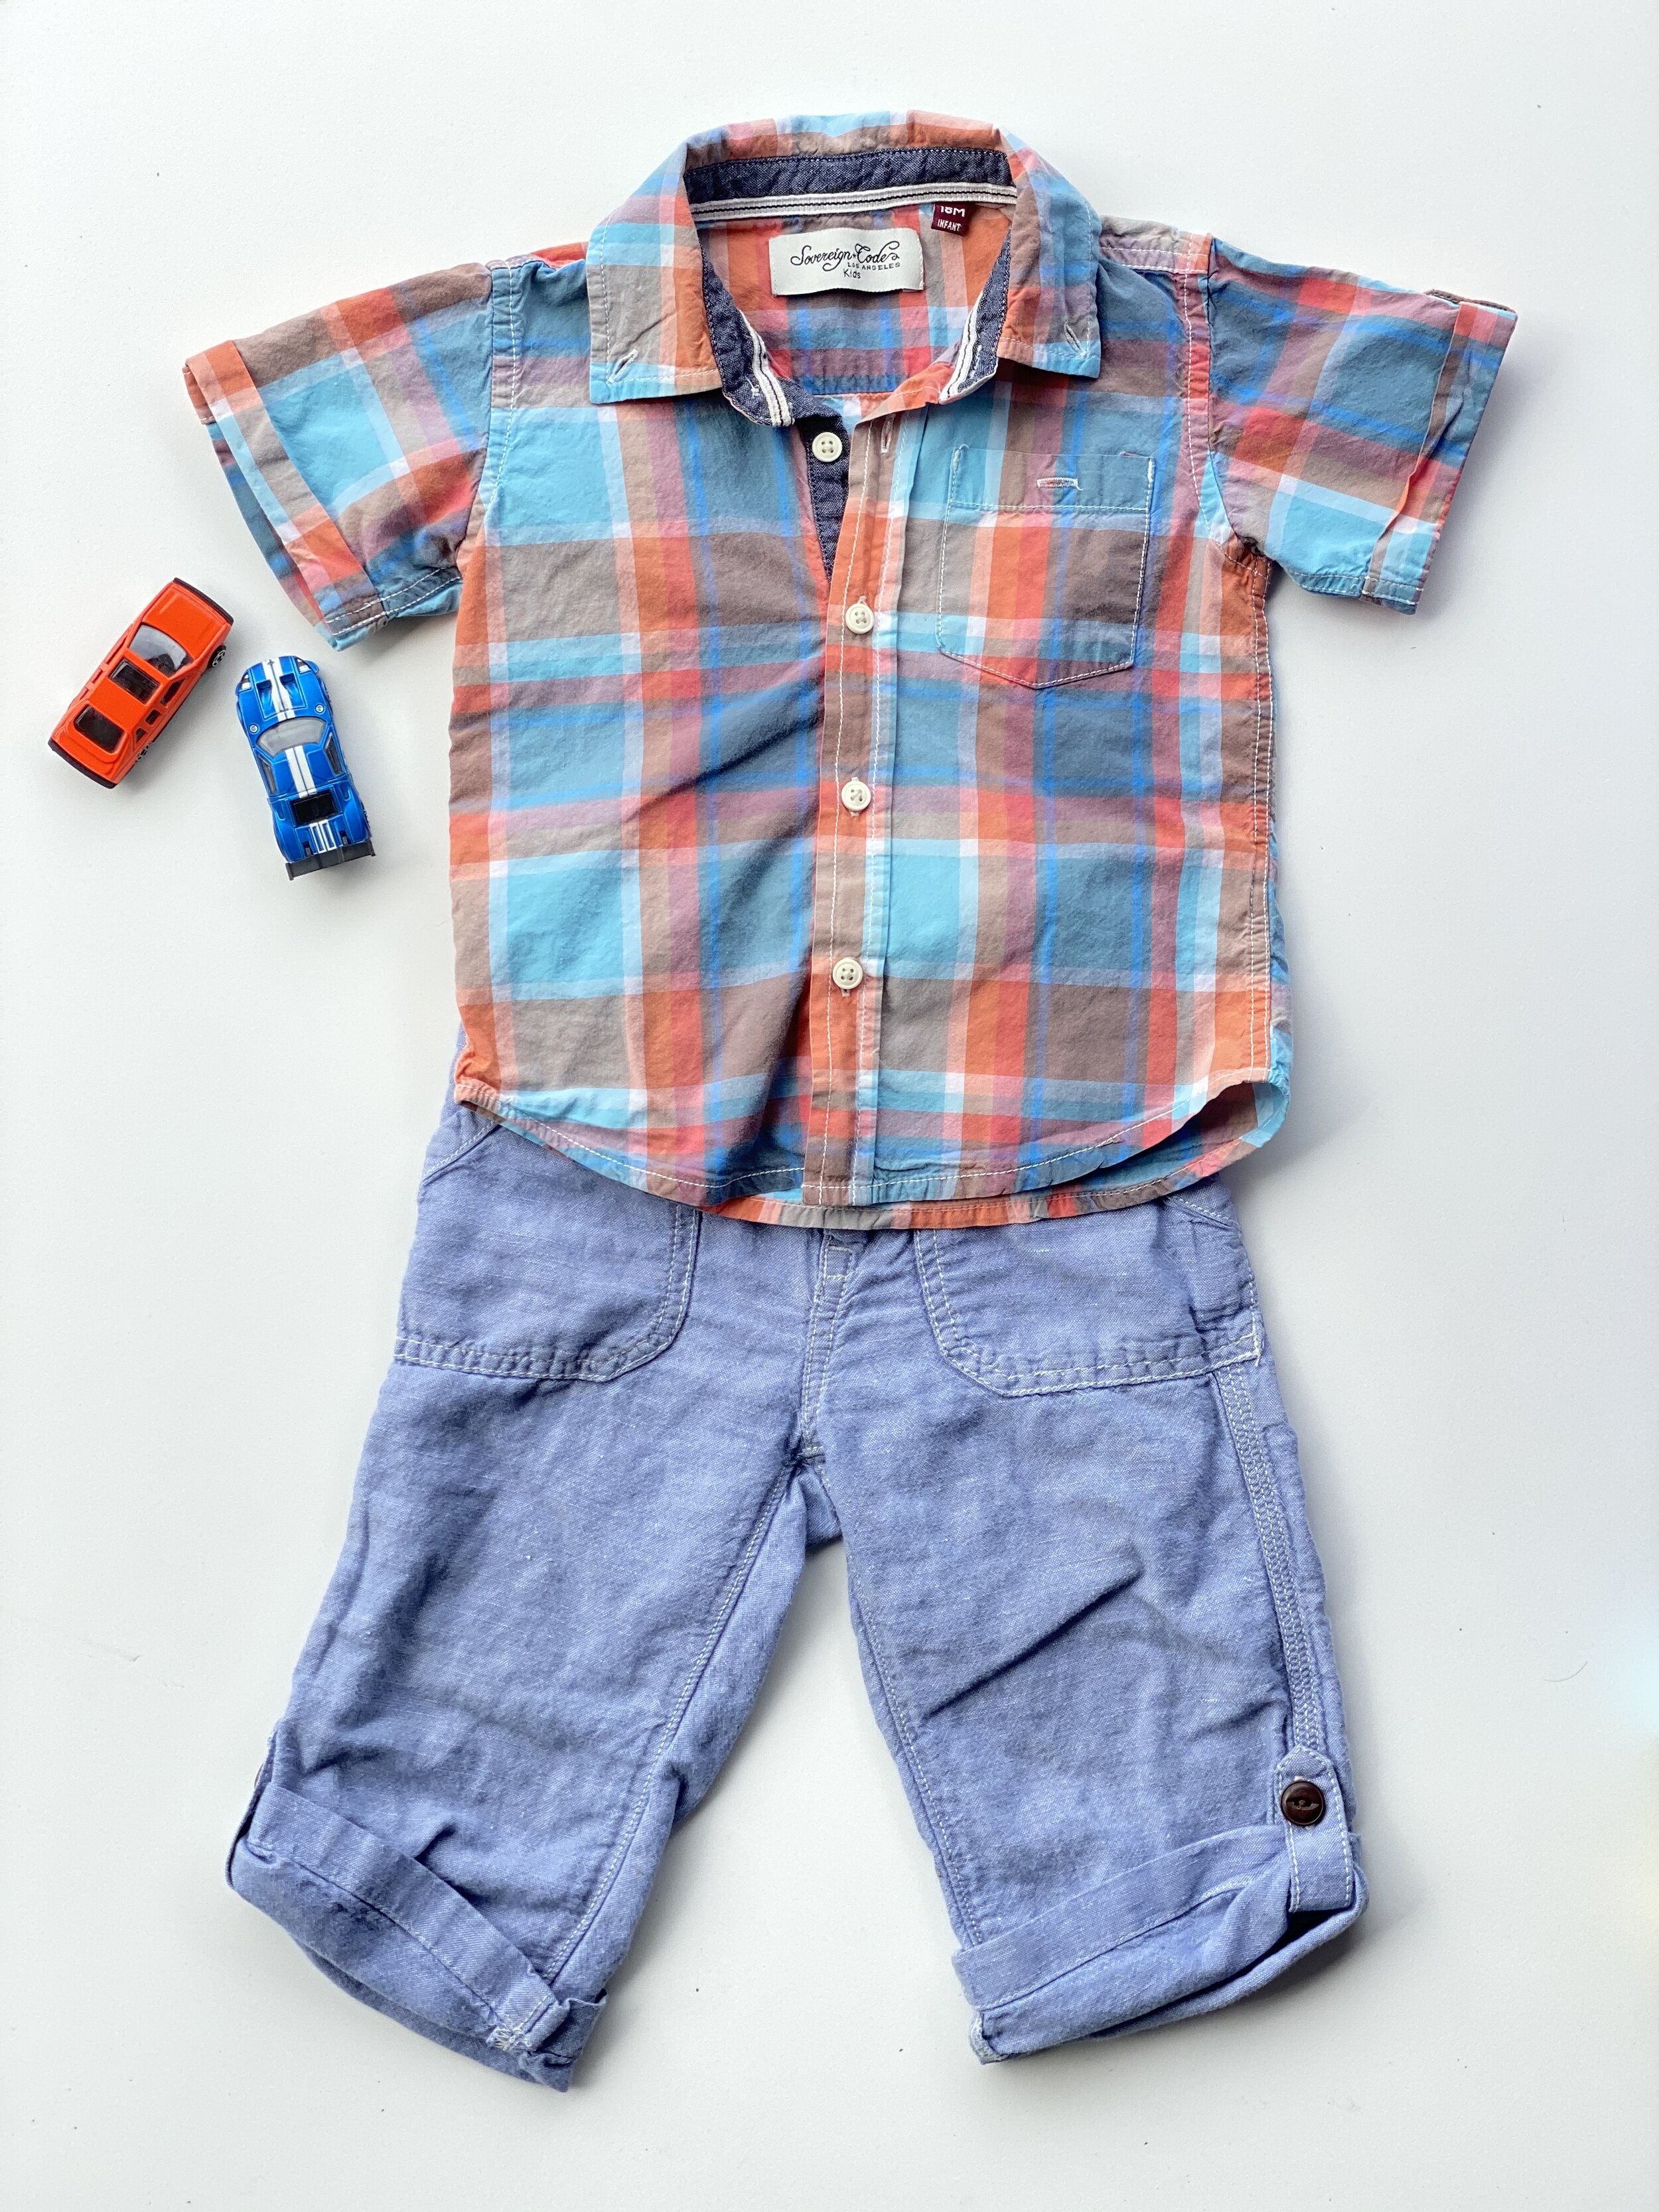 Baby Boys Clothes Aged 12-18 Months Make Your Own Bundle Jeans Tops Sweaters Etc